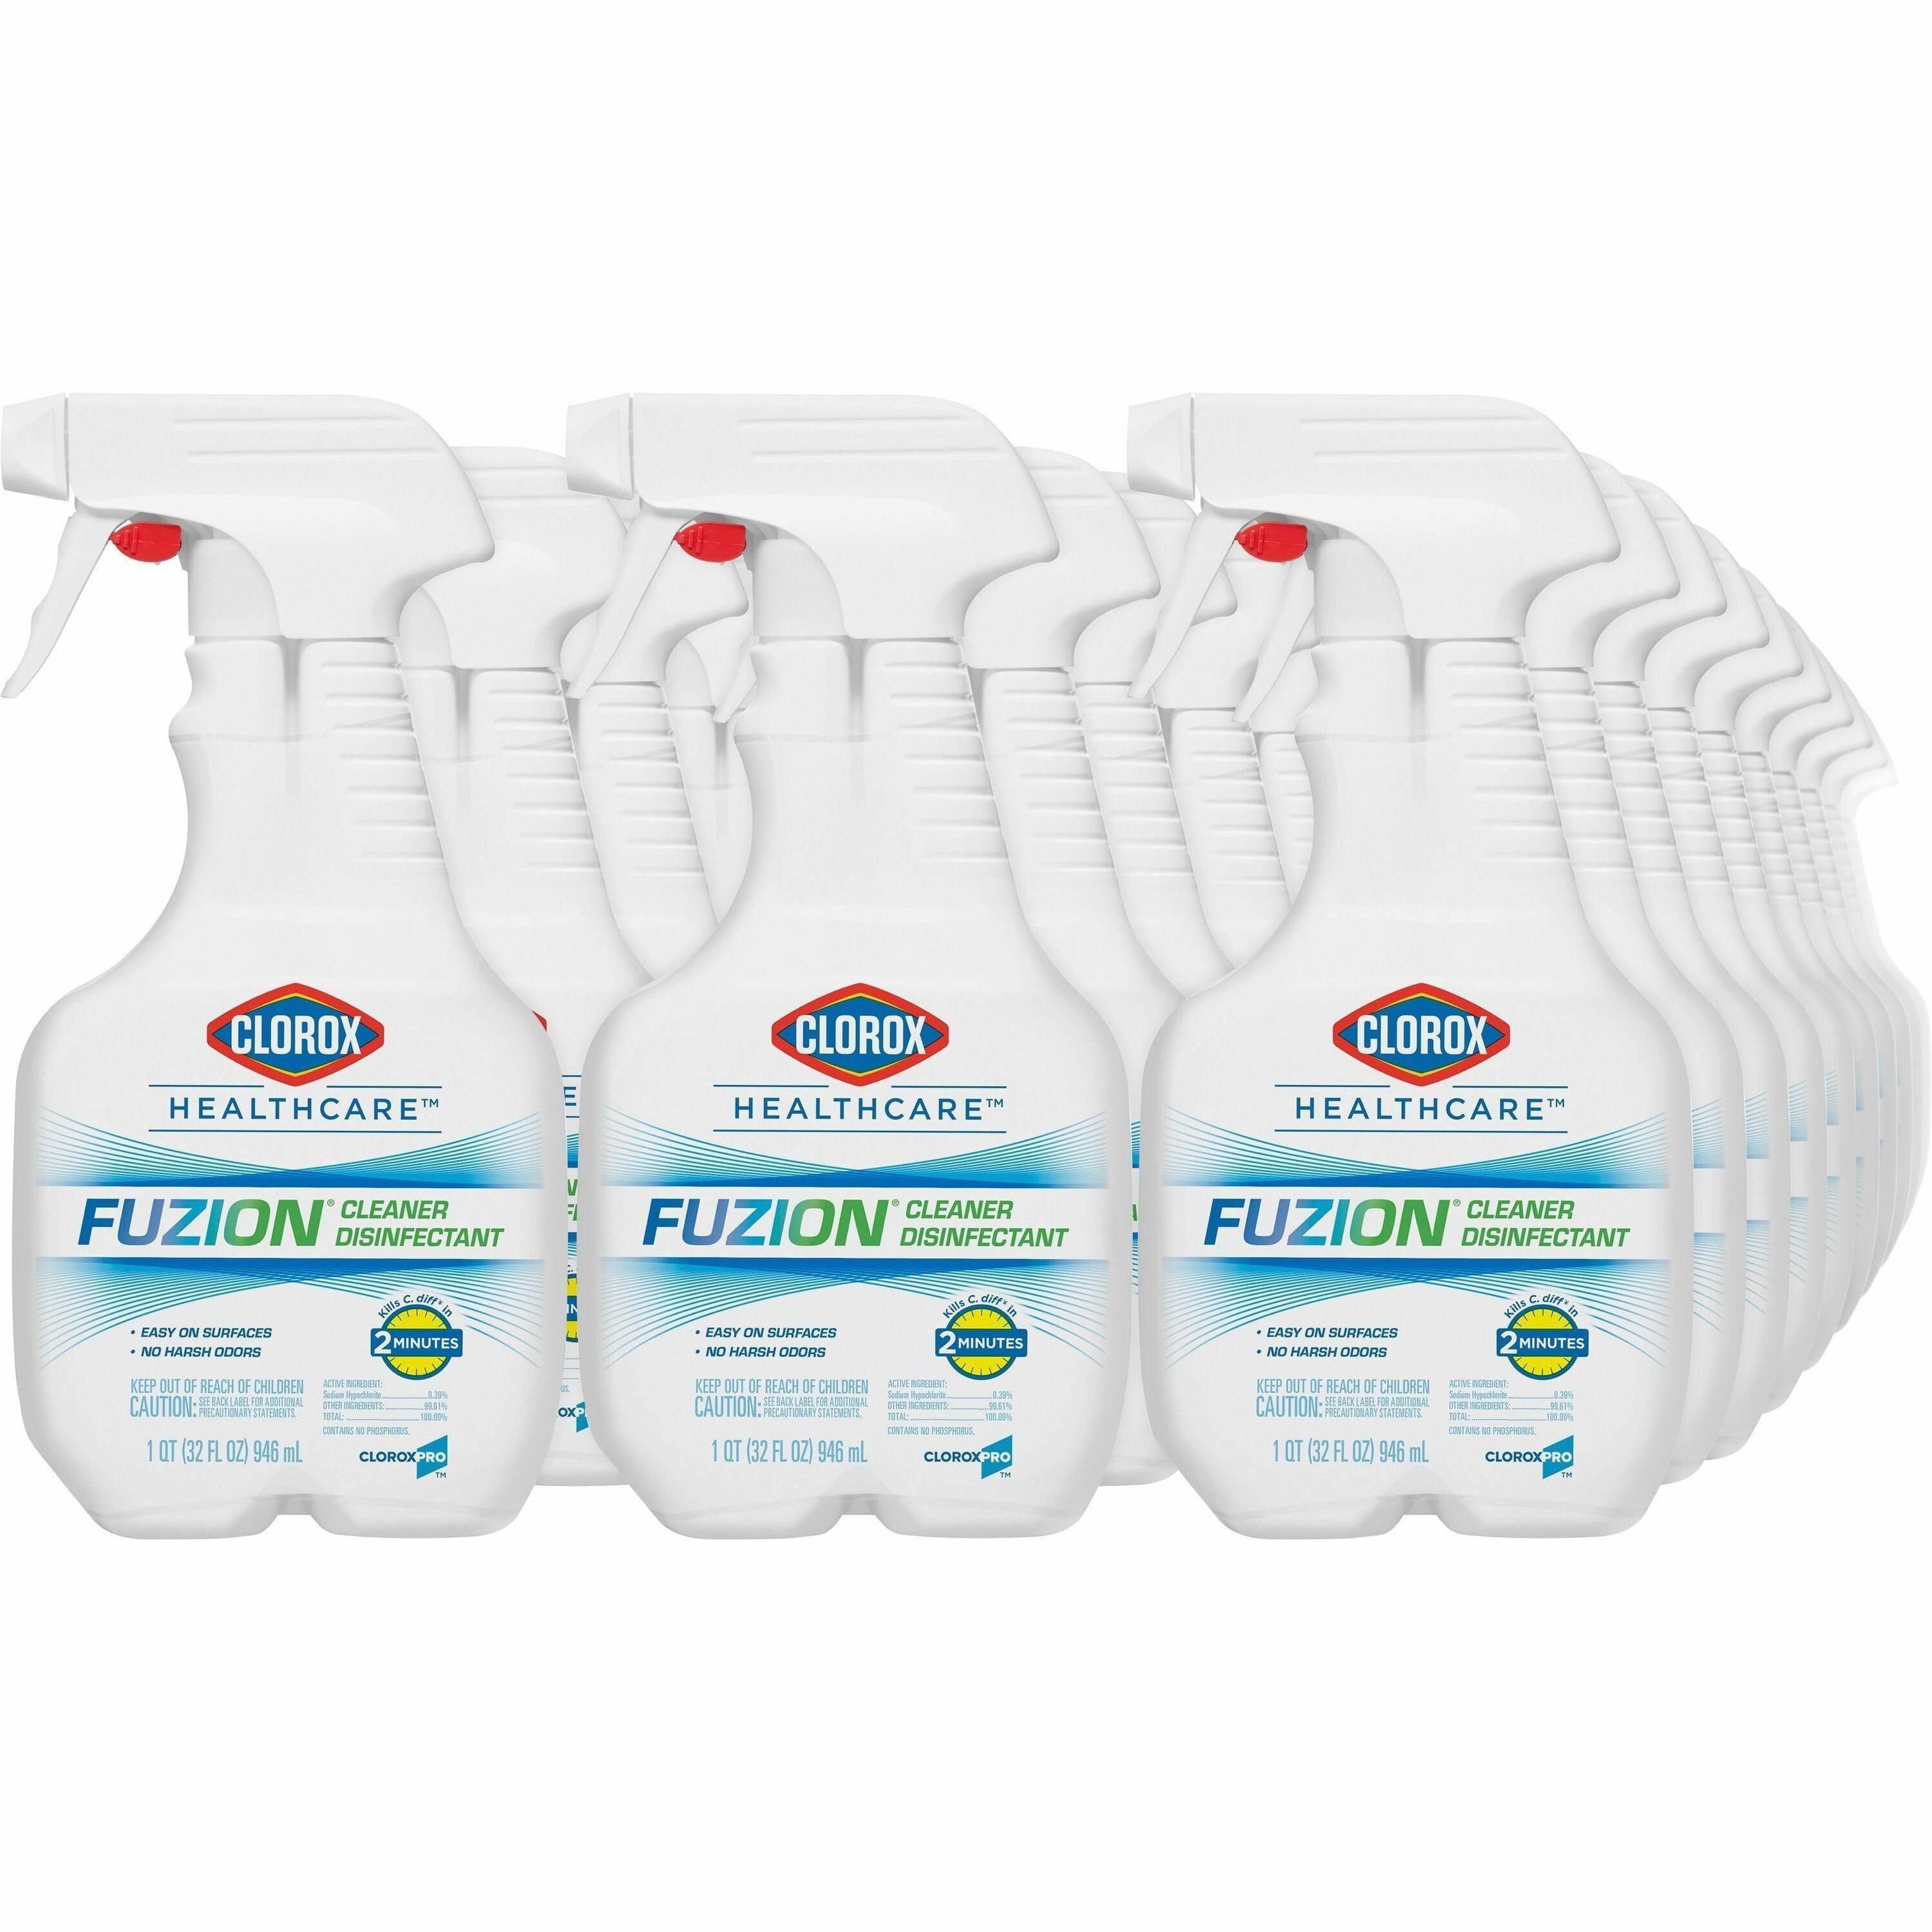 Clorox Fuzion Cleaner Disinfectant - Ready-To-Use - 32 fl oz (1 quart)Bottle - 432 / Pallet - Low Odor, Odor Neutralizer, Easy to Use - Translucent - 1